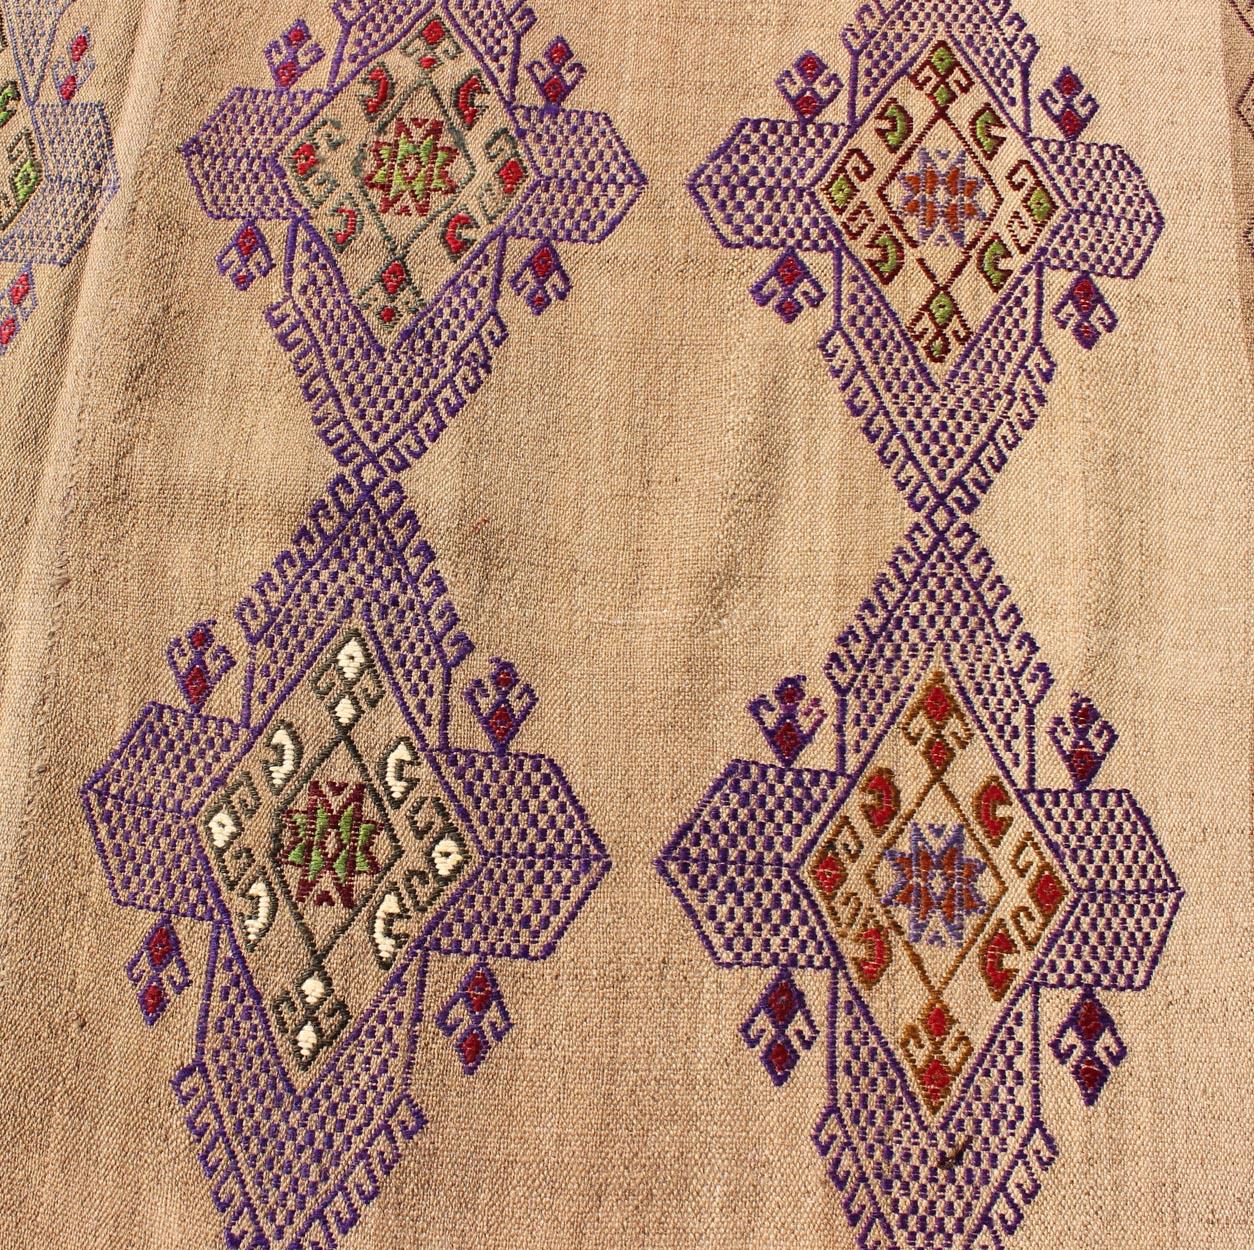 20th Century Turkish Kilim Hand Woven Embroidered Purple Diamonds on a Tan Background For Sale